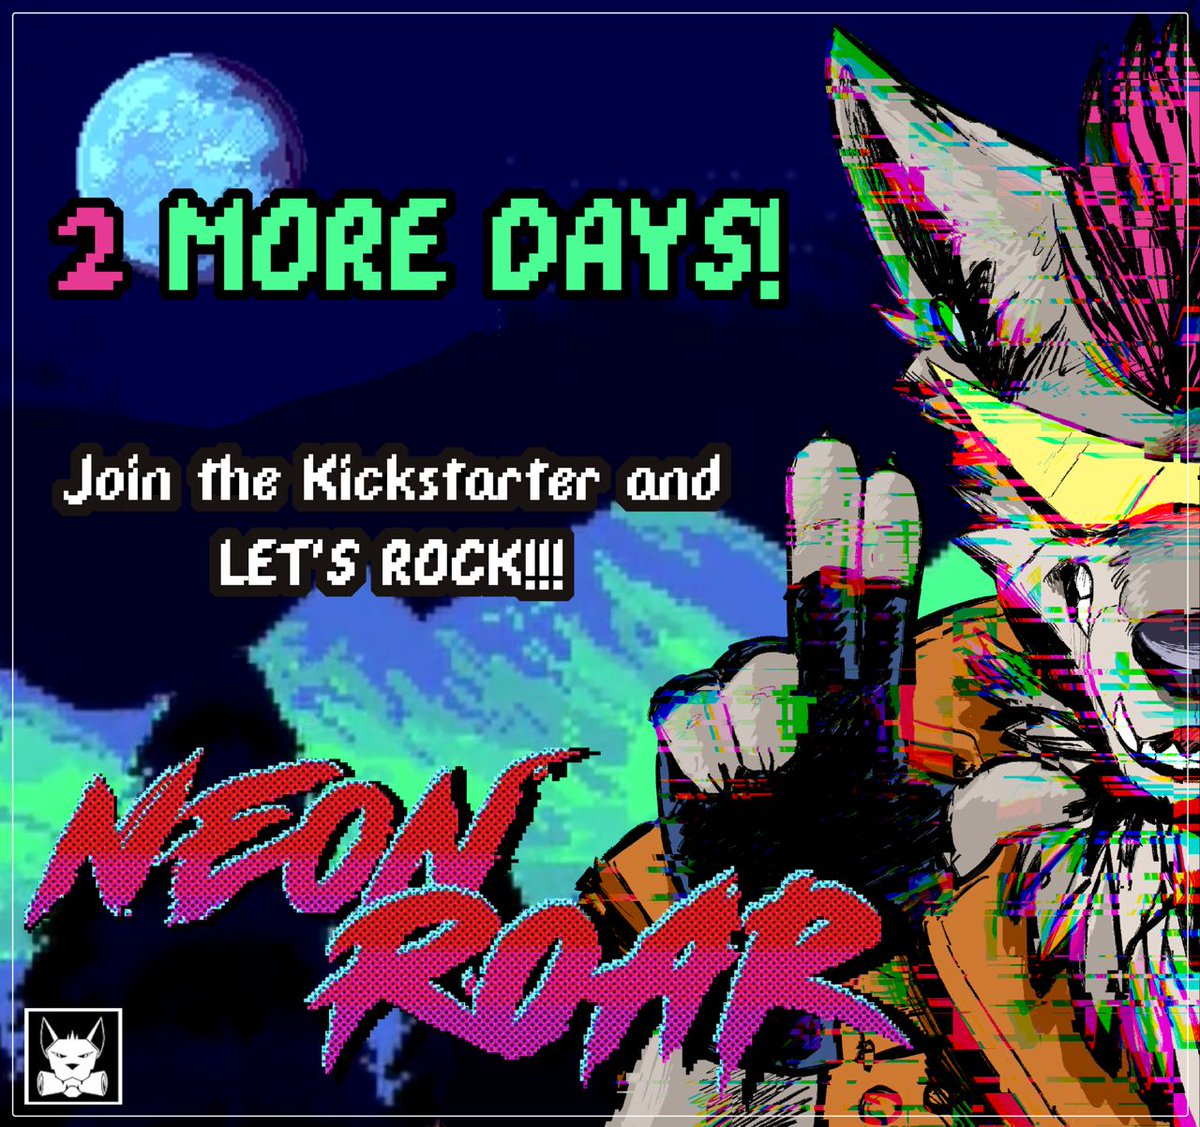 Radical! 🤘 The Kickstarter is ALMOST THERE! If you guys wanna play this excellent 16-bit furry game, let's try to make it happen for those hard working artists and devs! Rewards and other perks here: kickstarter.com/projects/fenri…